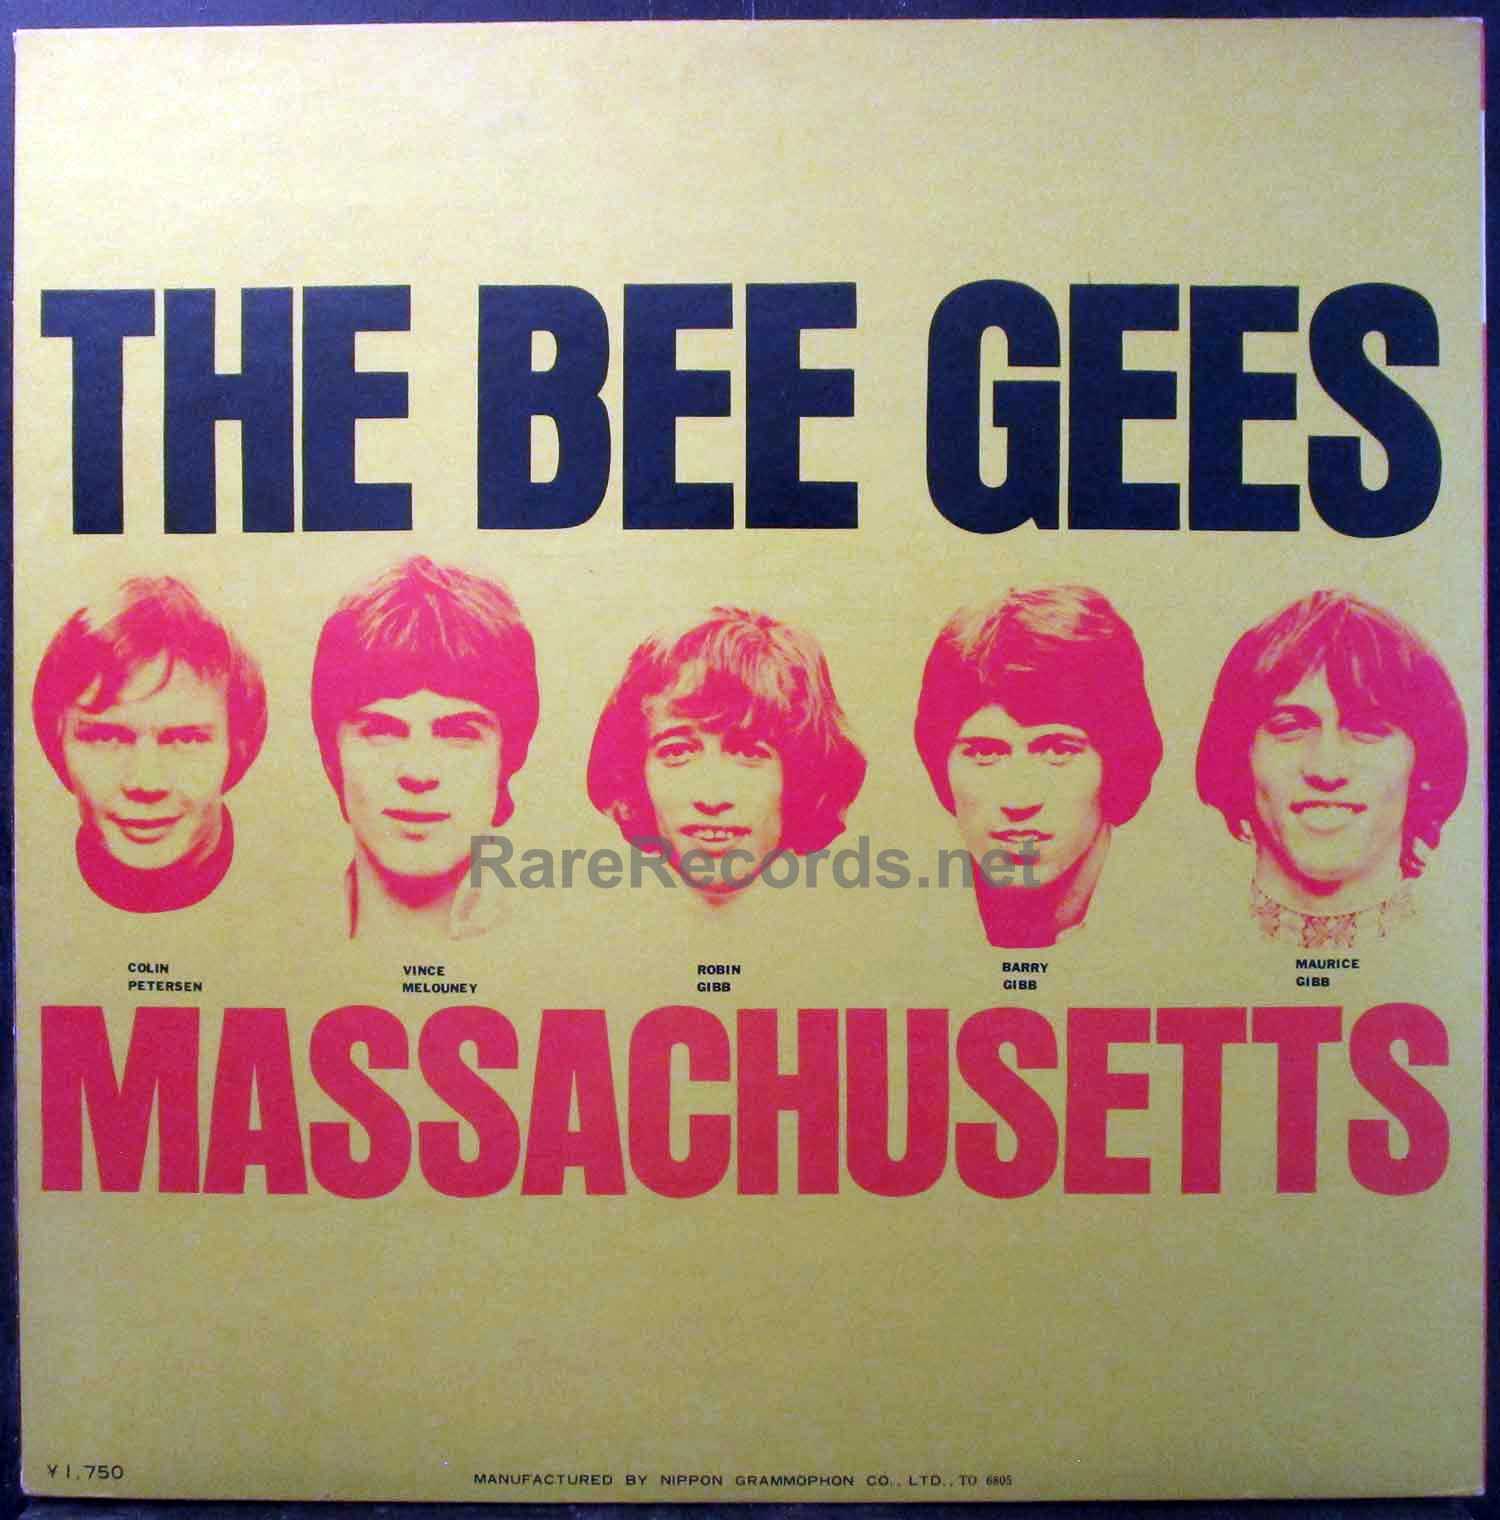 Bee Gees - Massachusetts (Horizontal) 1968 Japan white label promotional LP  with obi